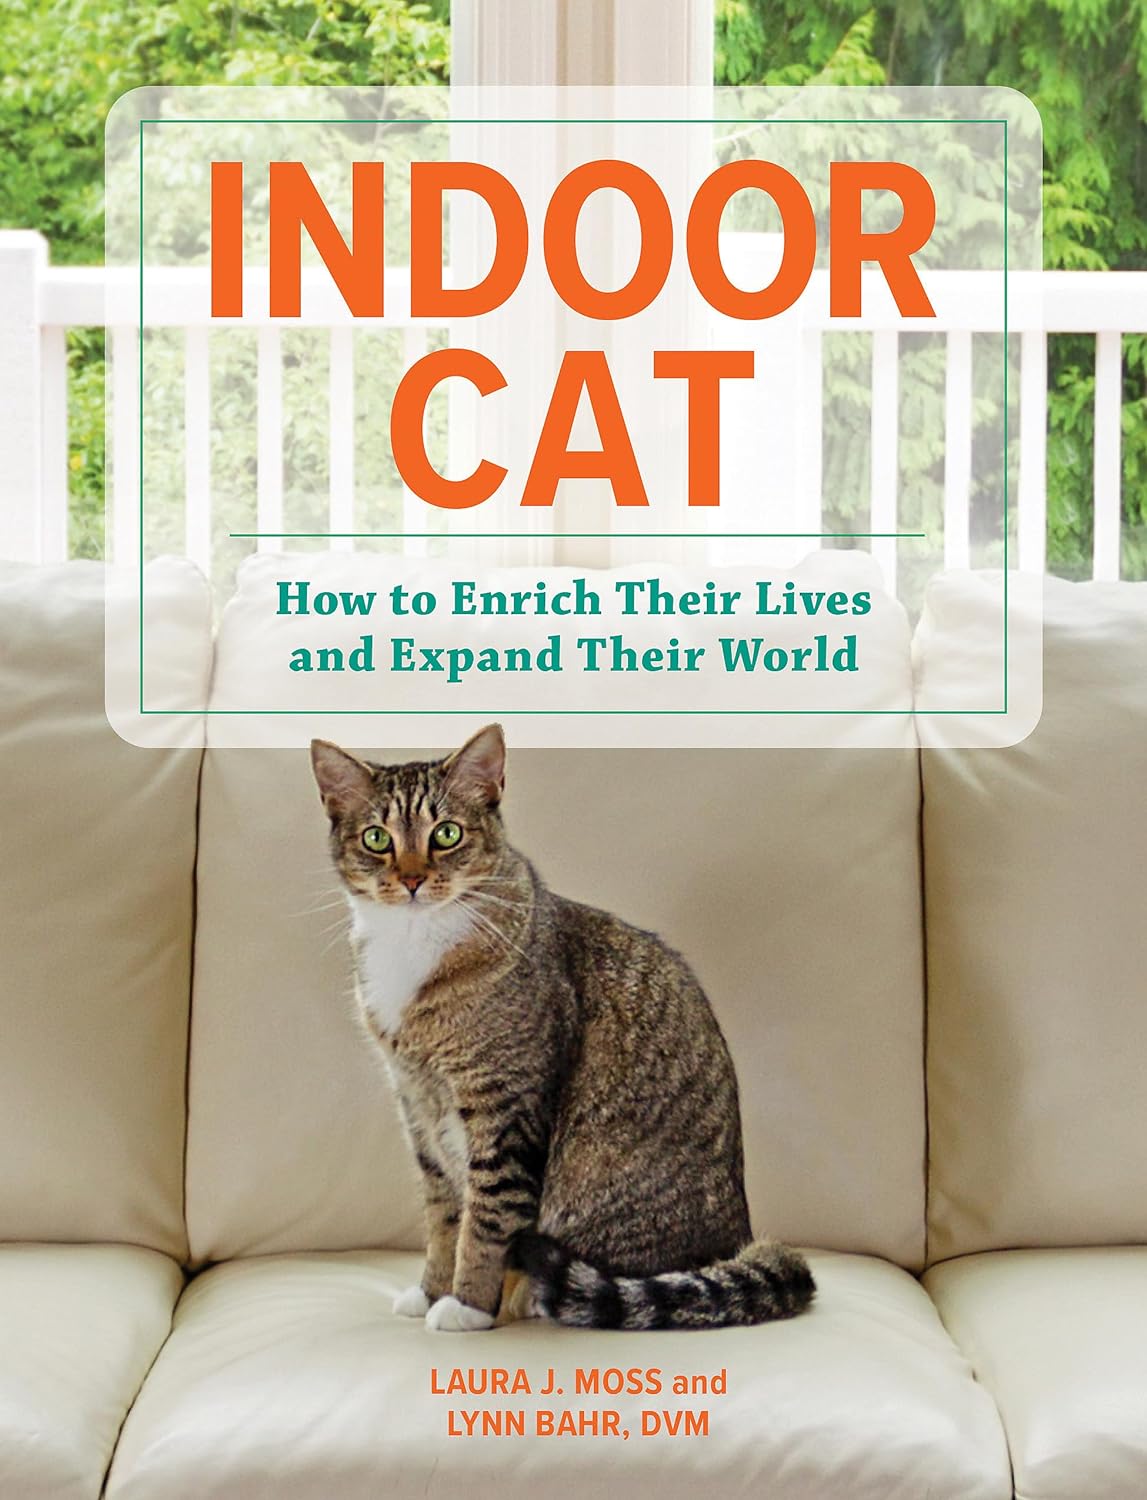 Indoor Cat: How to Enrich Their Lives and Expand Their World by Laura J Moss and Lynn Bahr, DVM